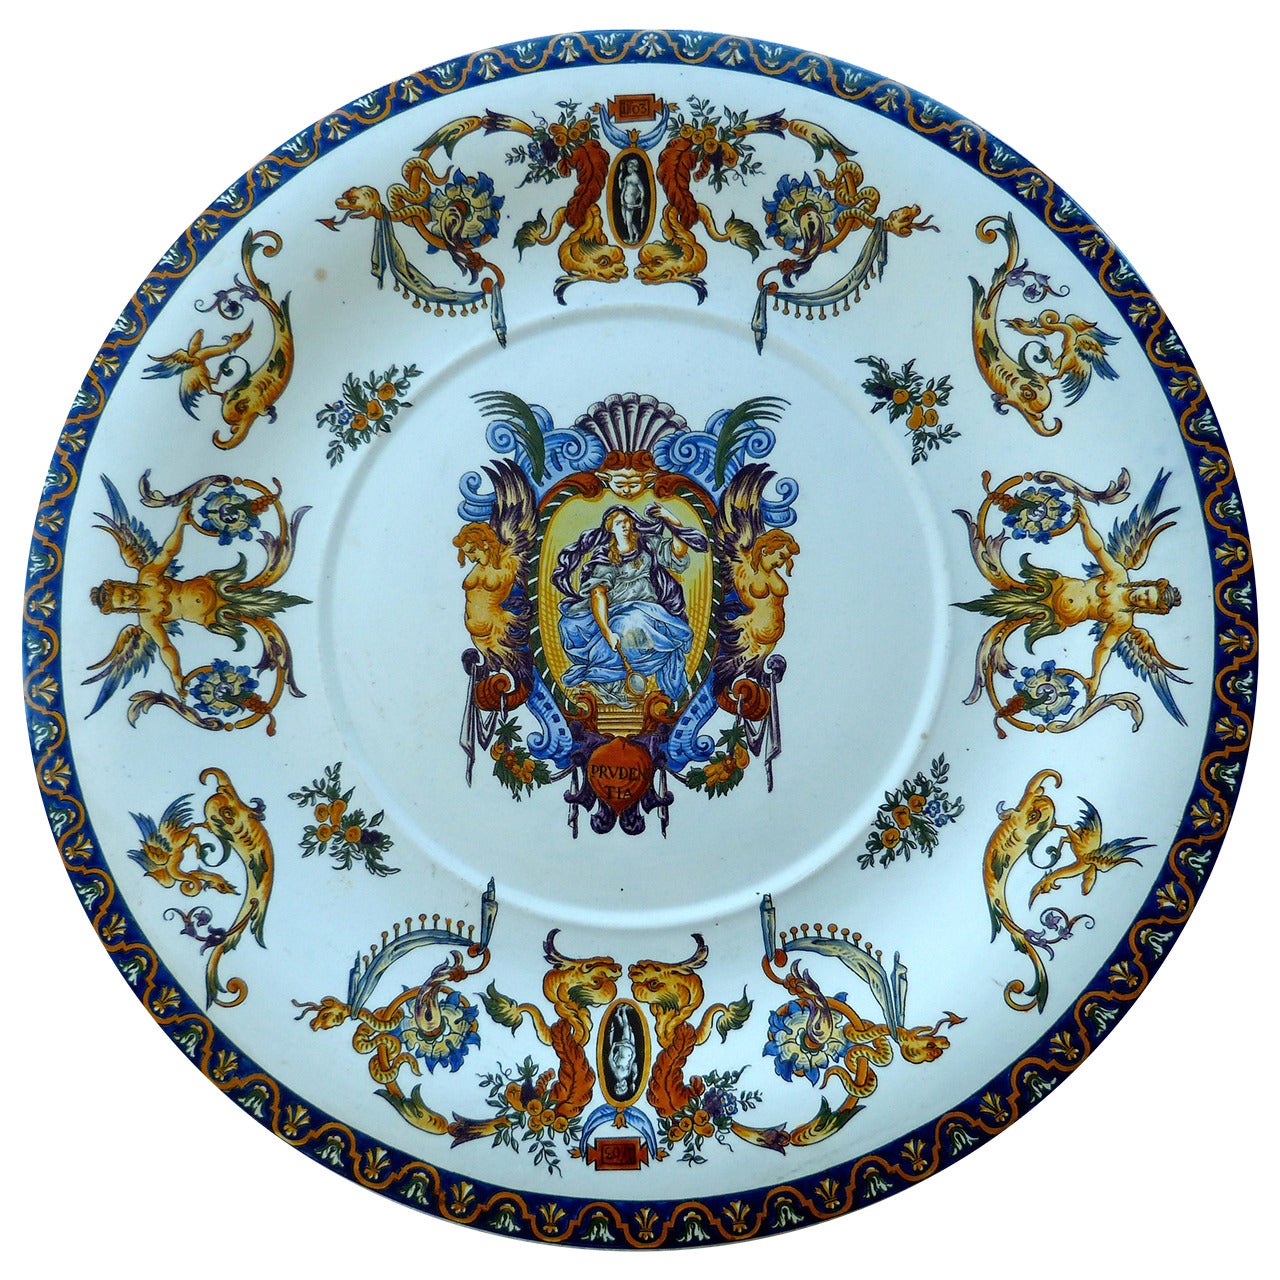 French Gien Faience Renaissance Revival Charger